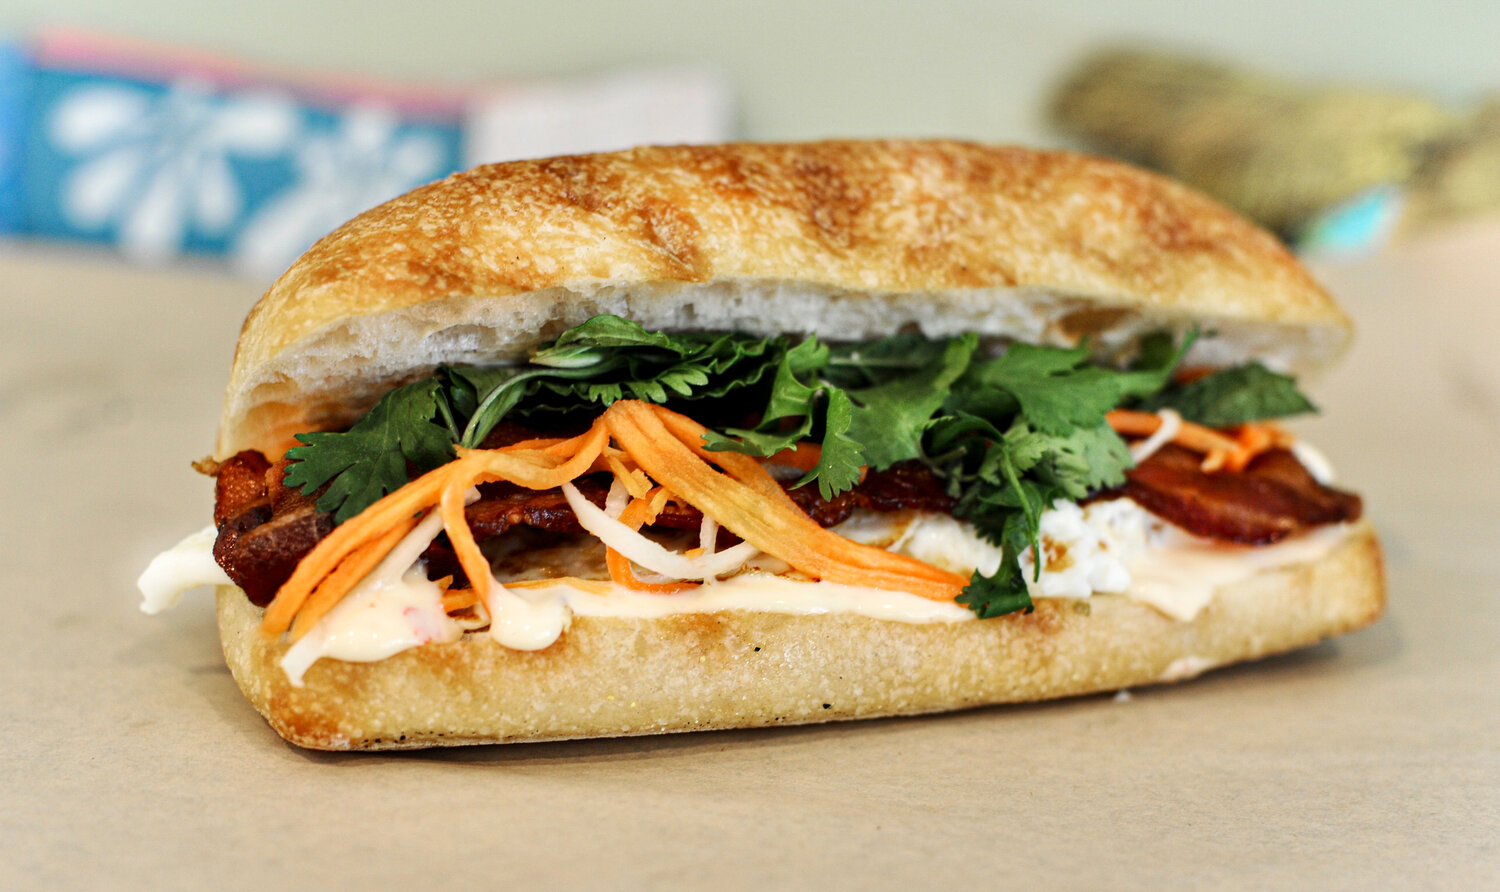 Breakfast Bahn Mi - A Vietnamese inspired breakfast sandwich with egg, bacon, pickled veg, Thai aioli, cilantro, and mint on a French baguette.